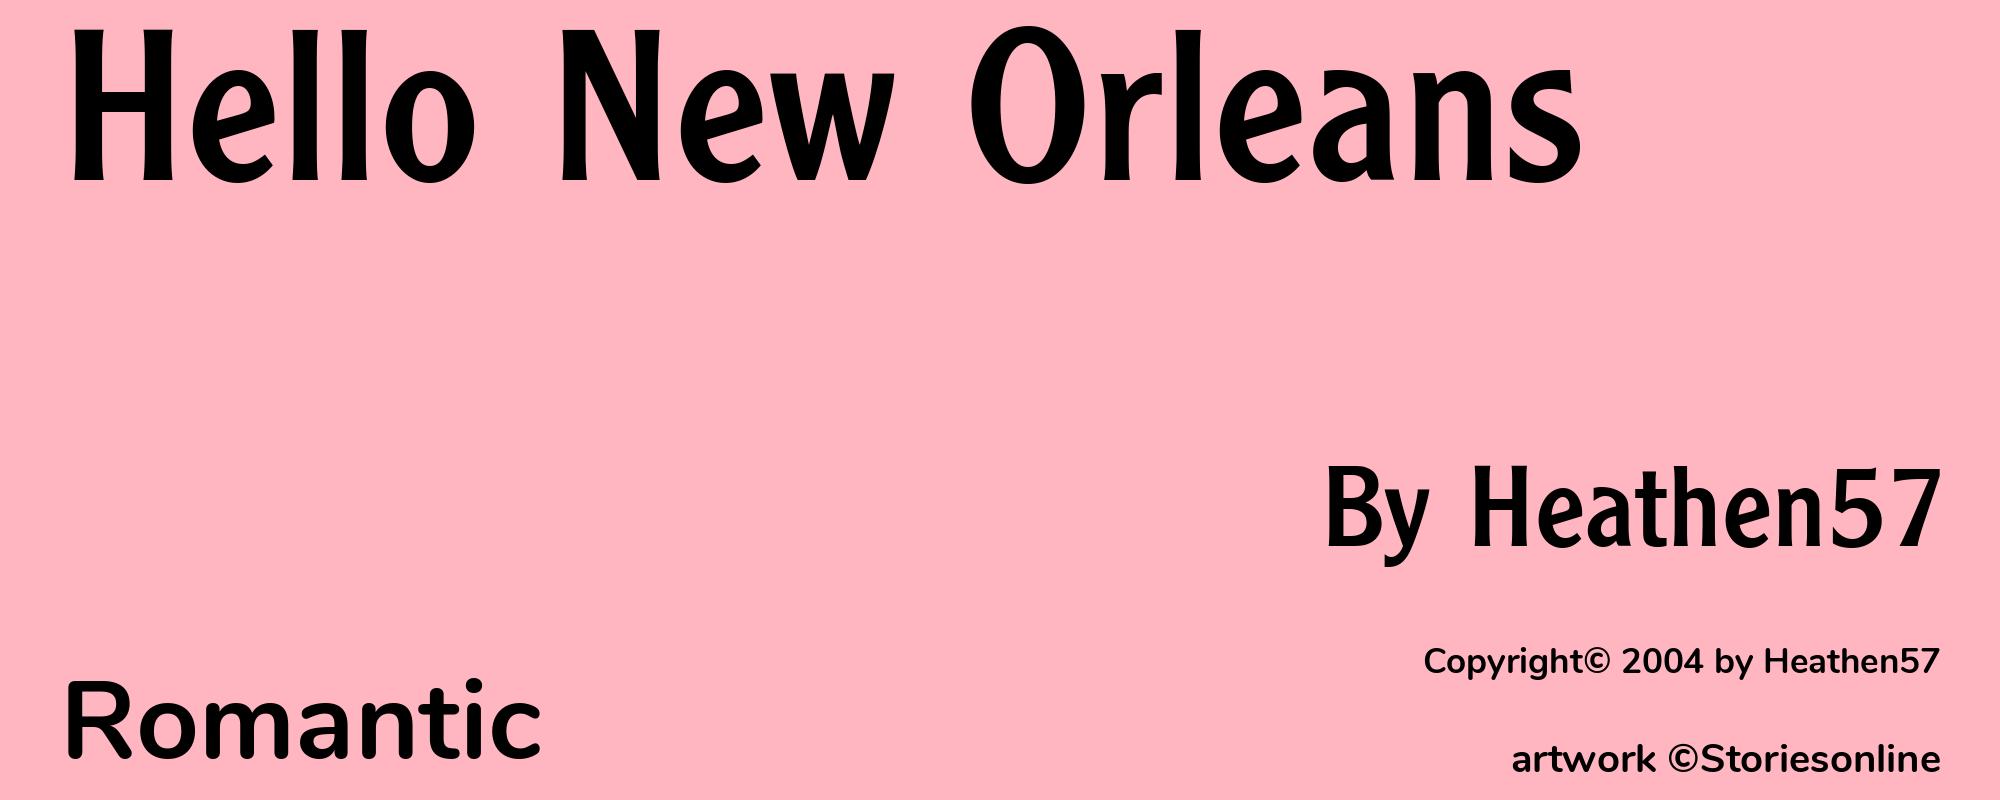 Hello New Orleans - Cover